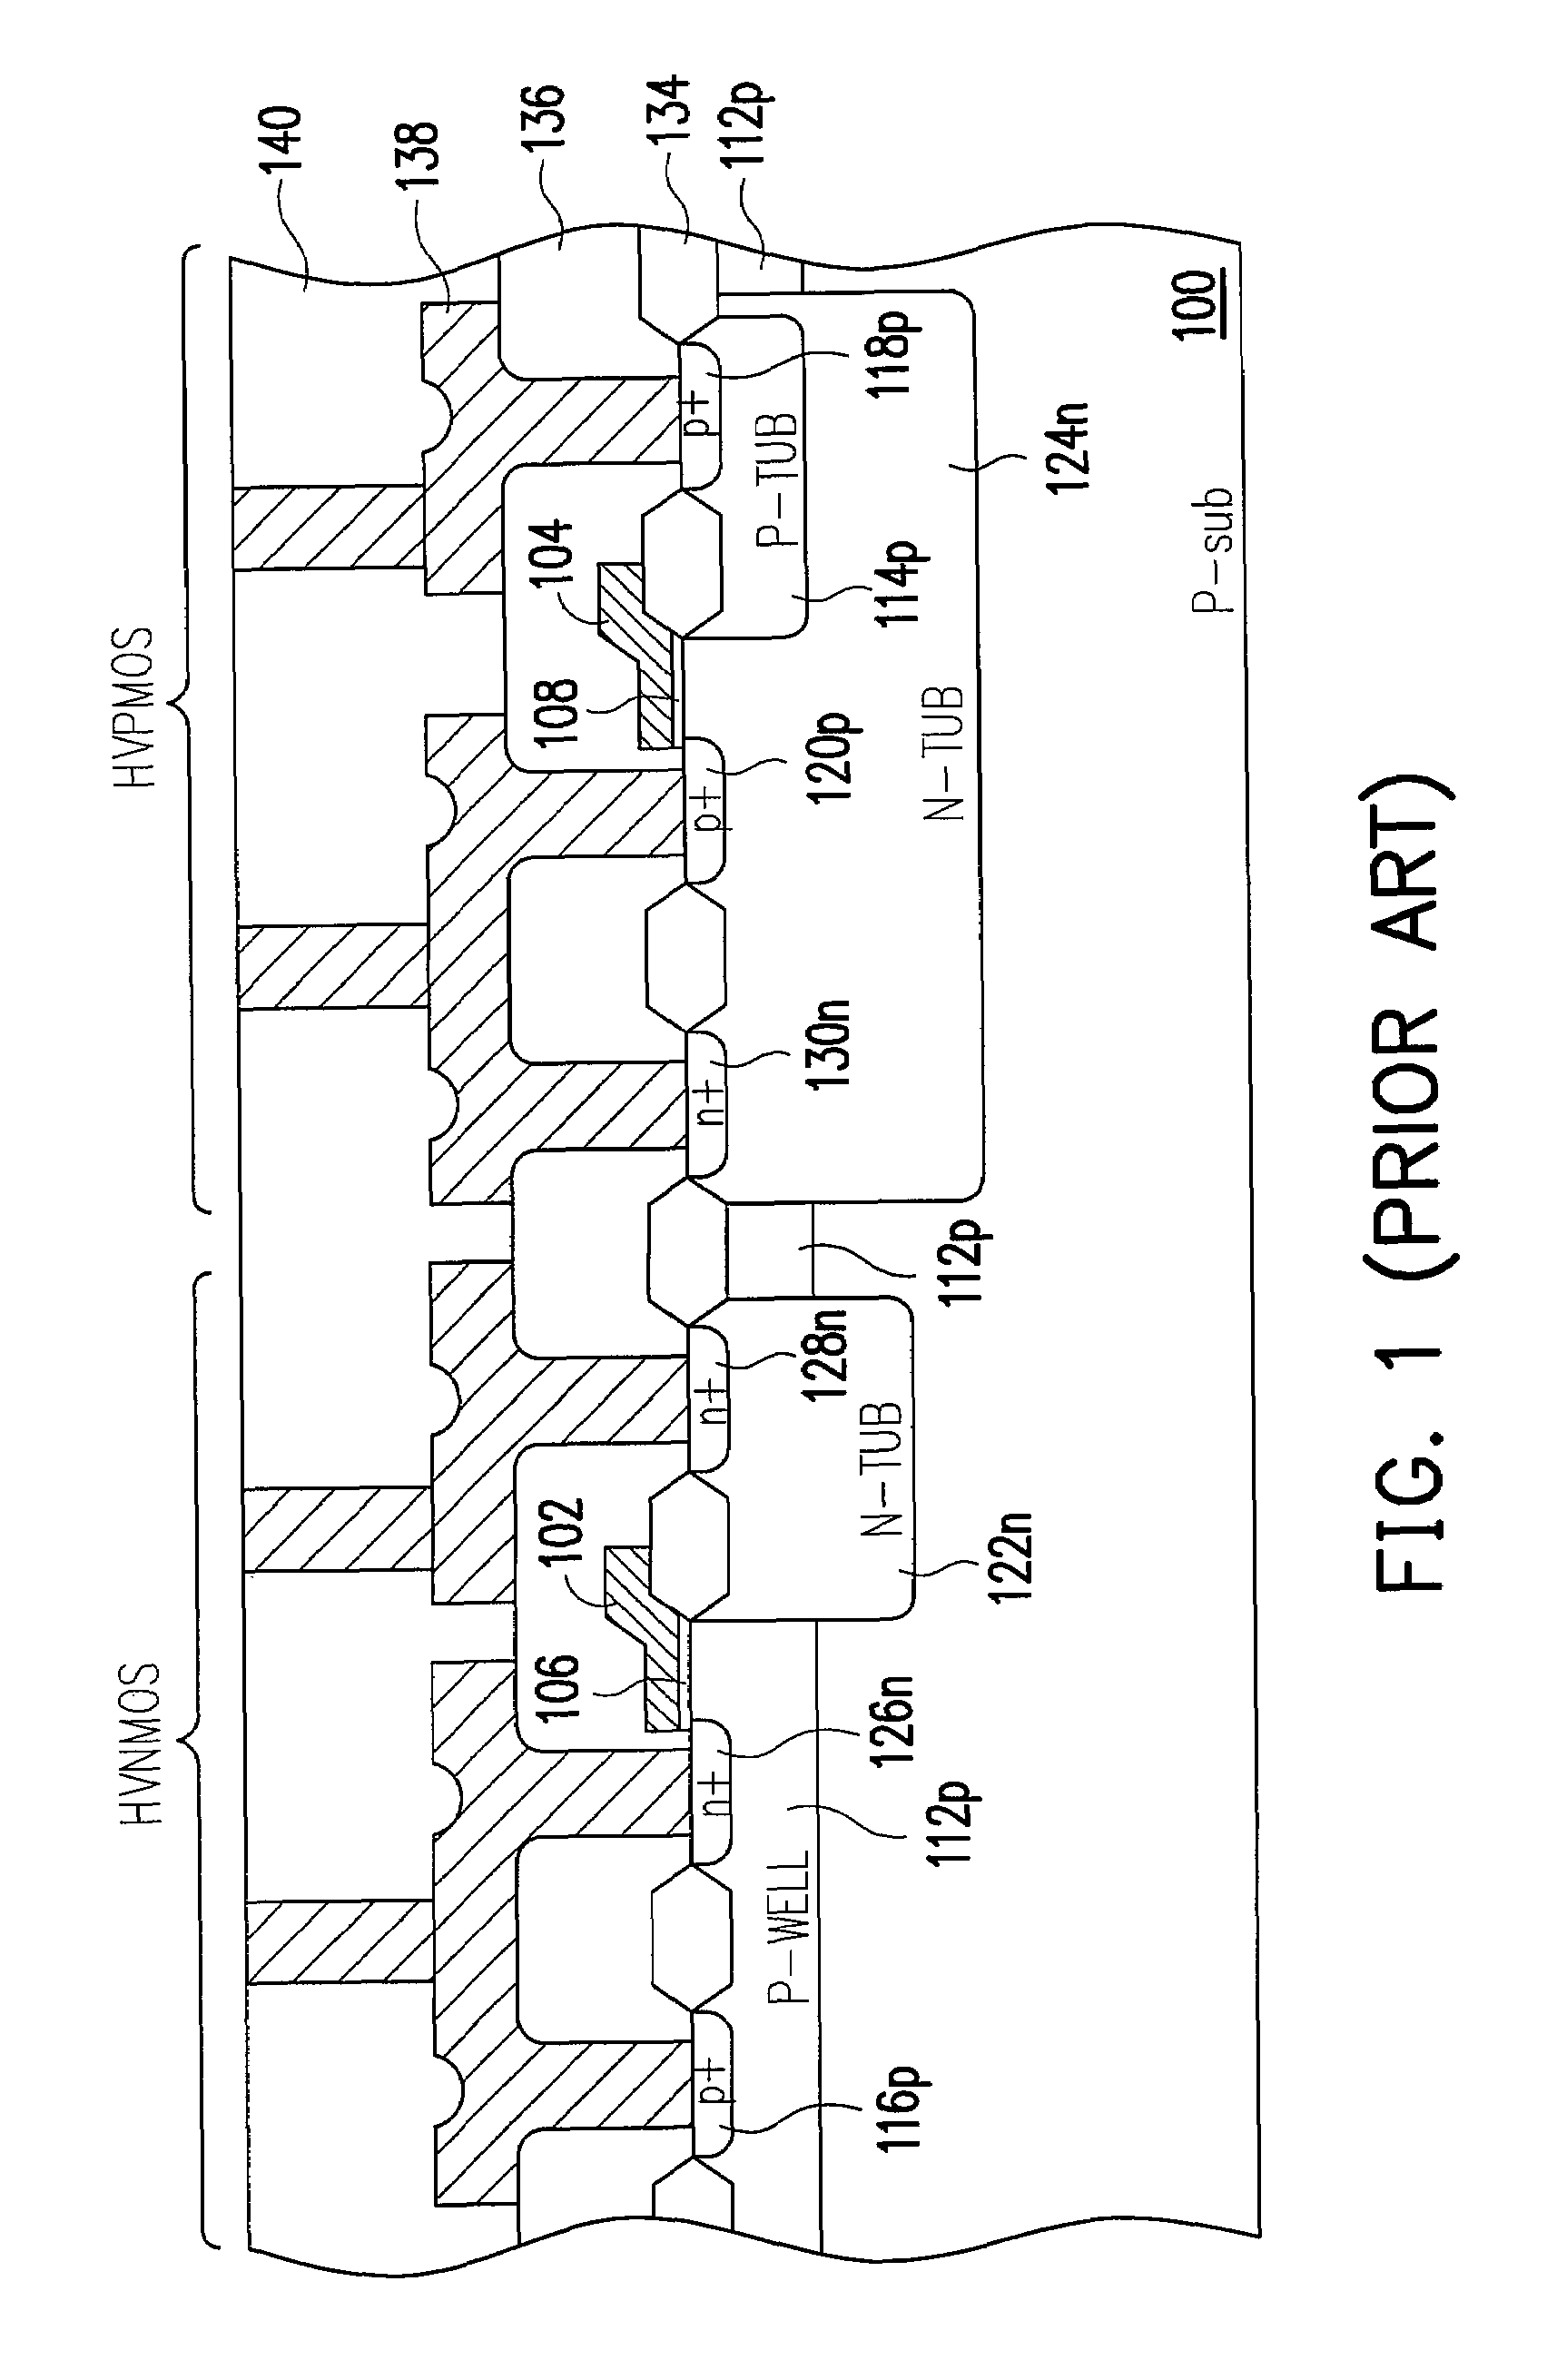 Complementary metal-oxide-semiconductor transistor for avoiding a latch-up problem